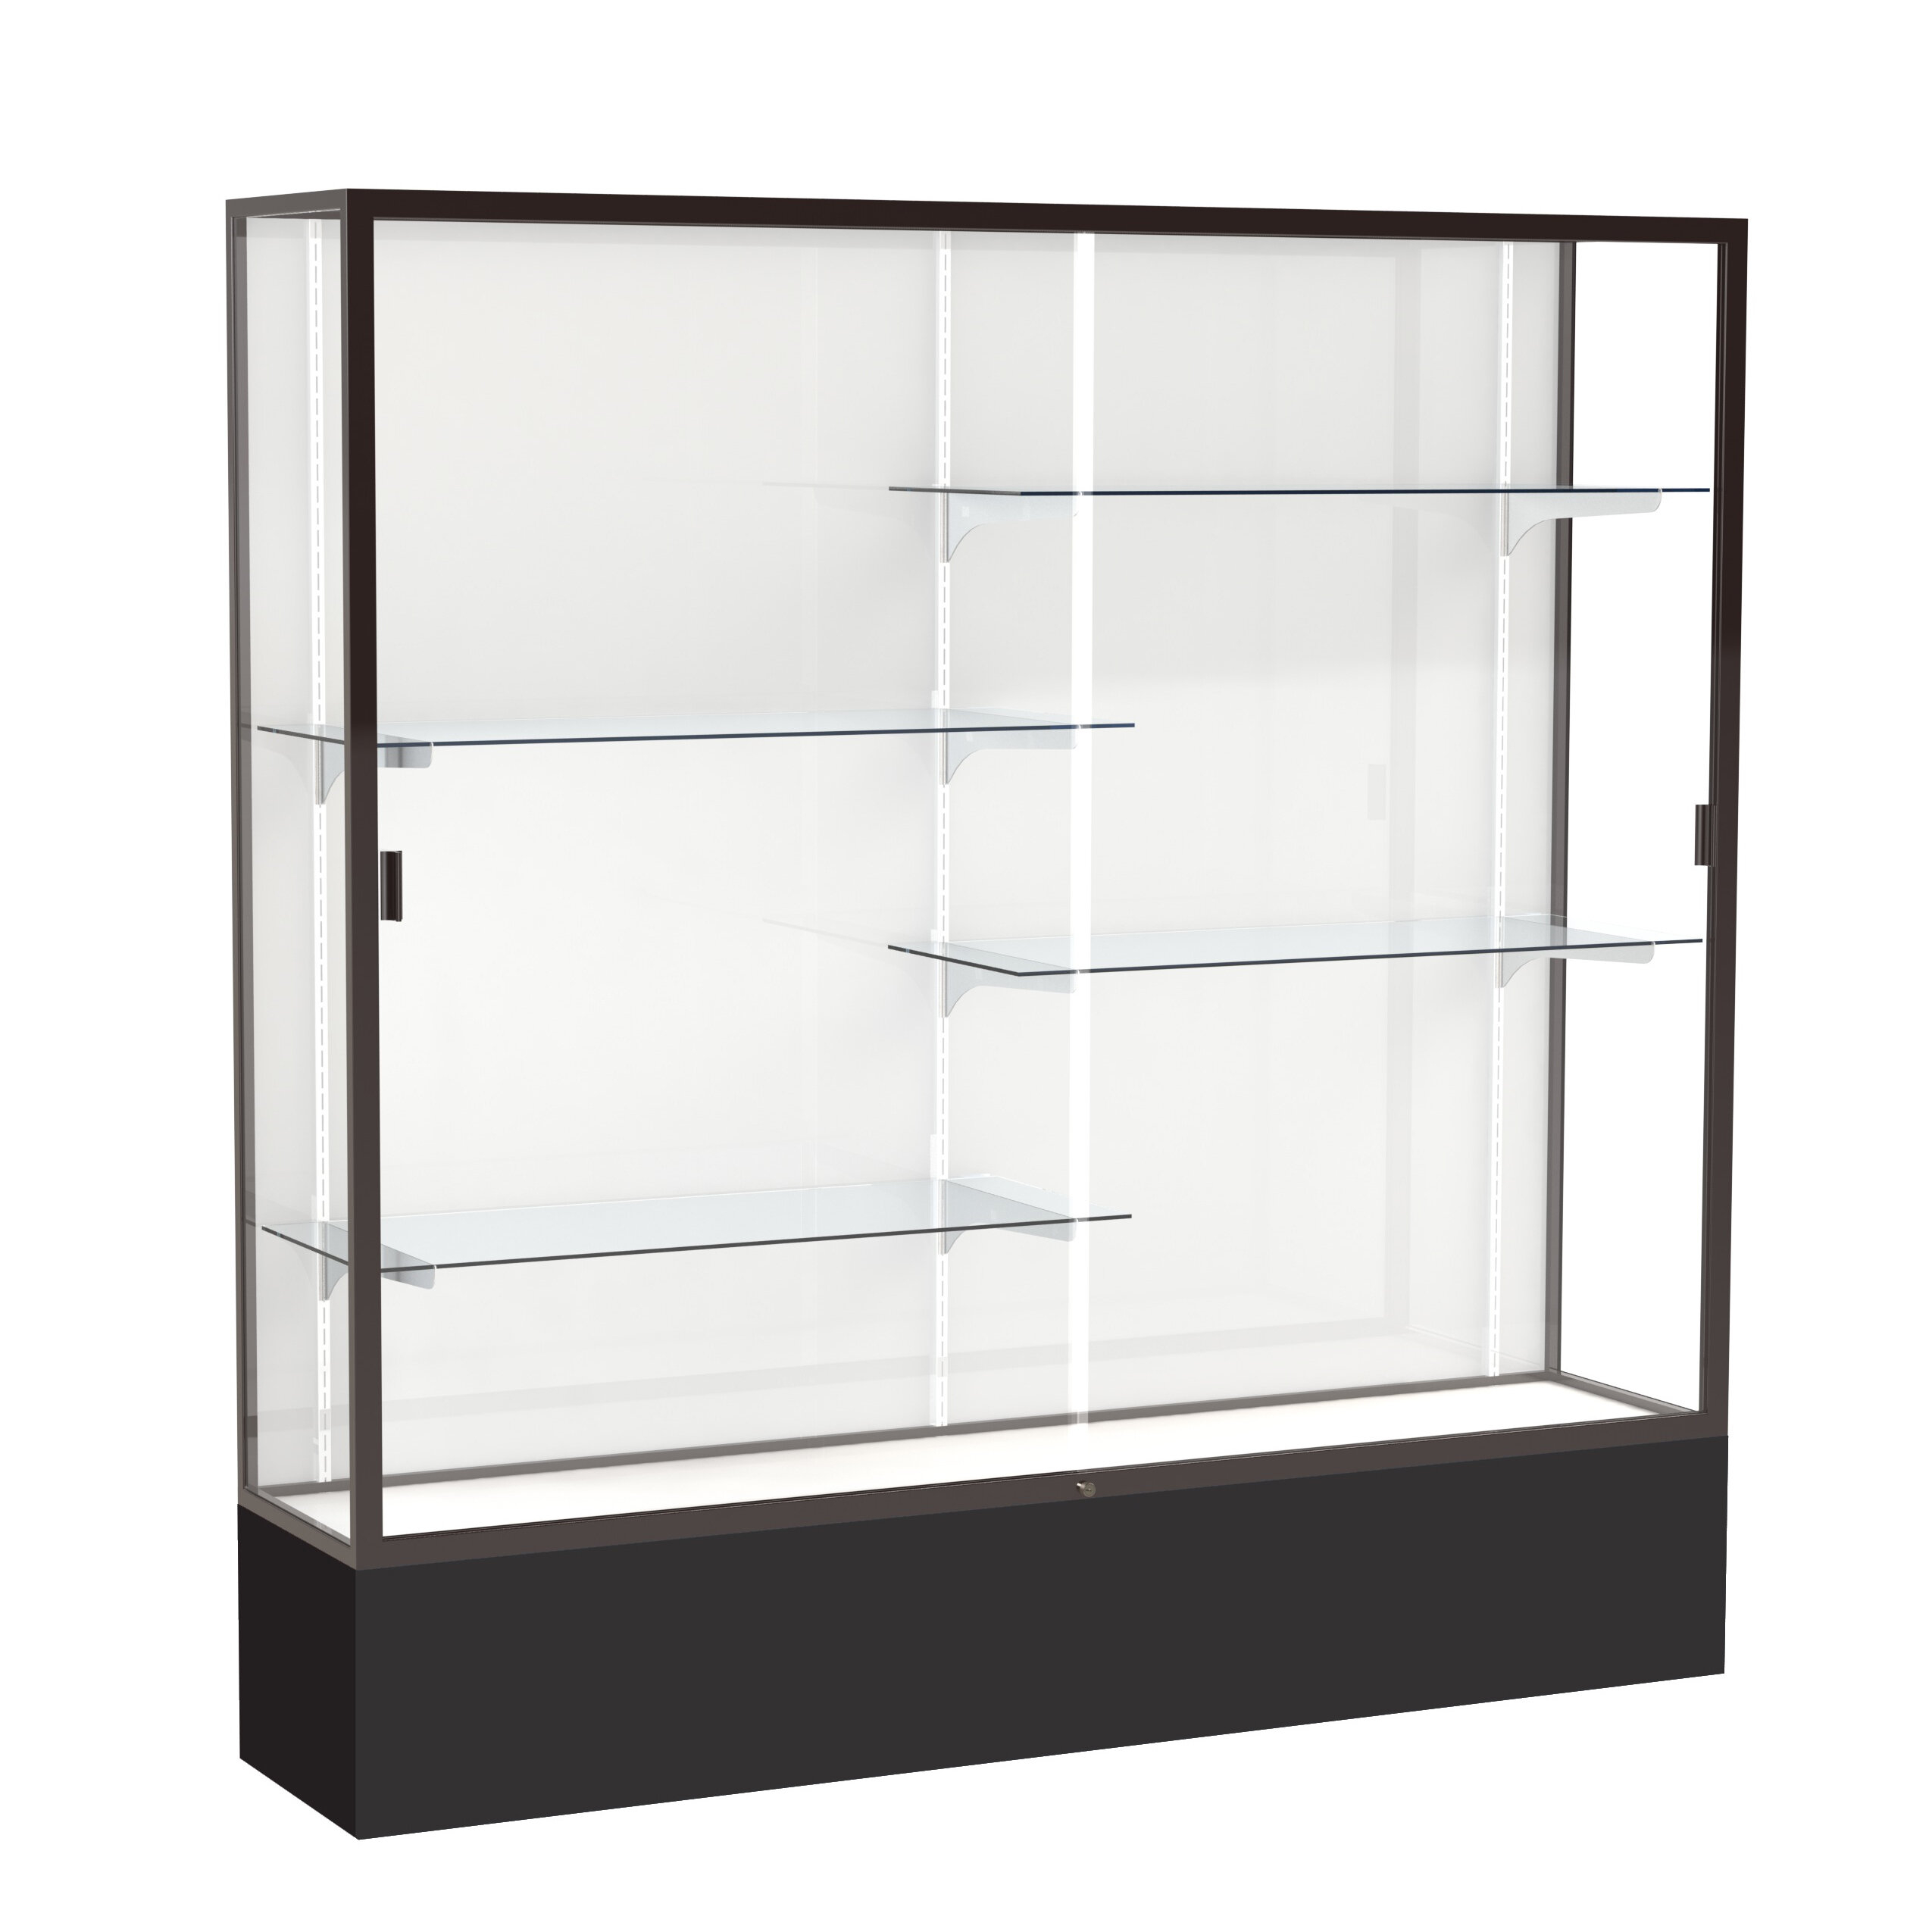 Collectible Display Show Case with LED Lights and Silver Base for 1/24 1/18 by Illumibox